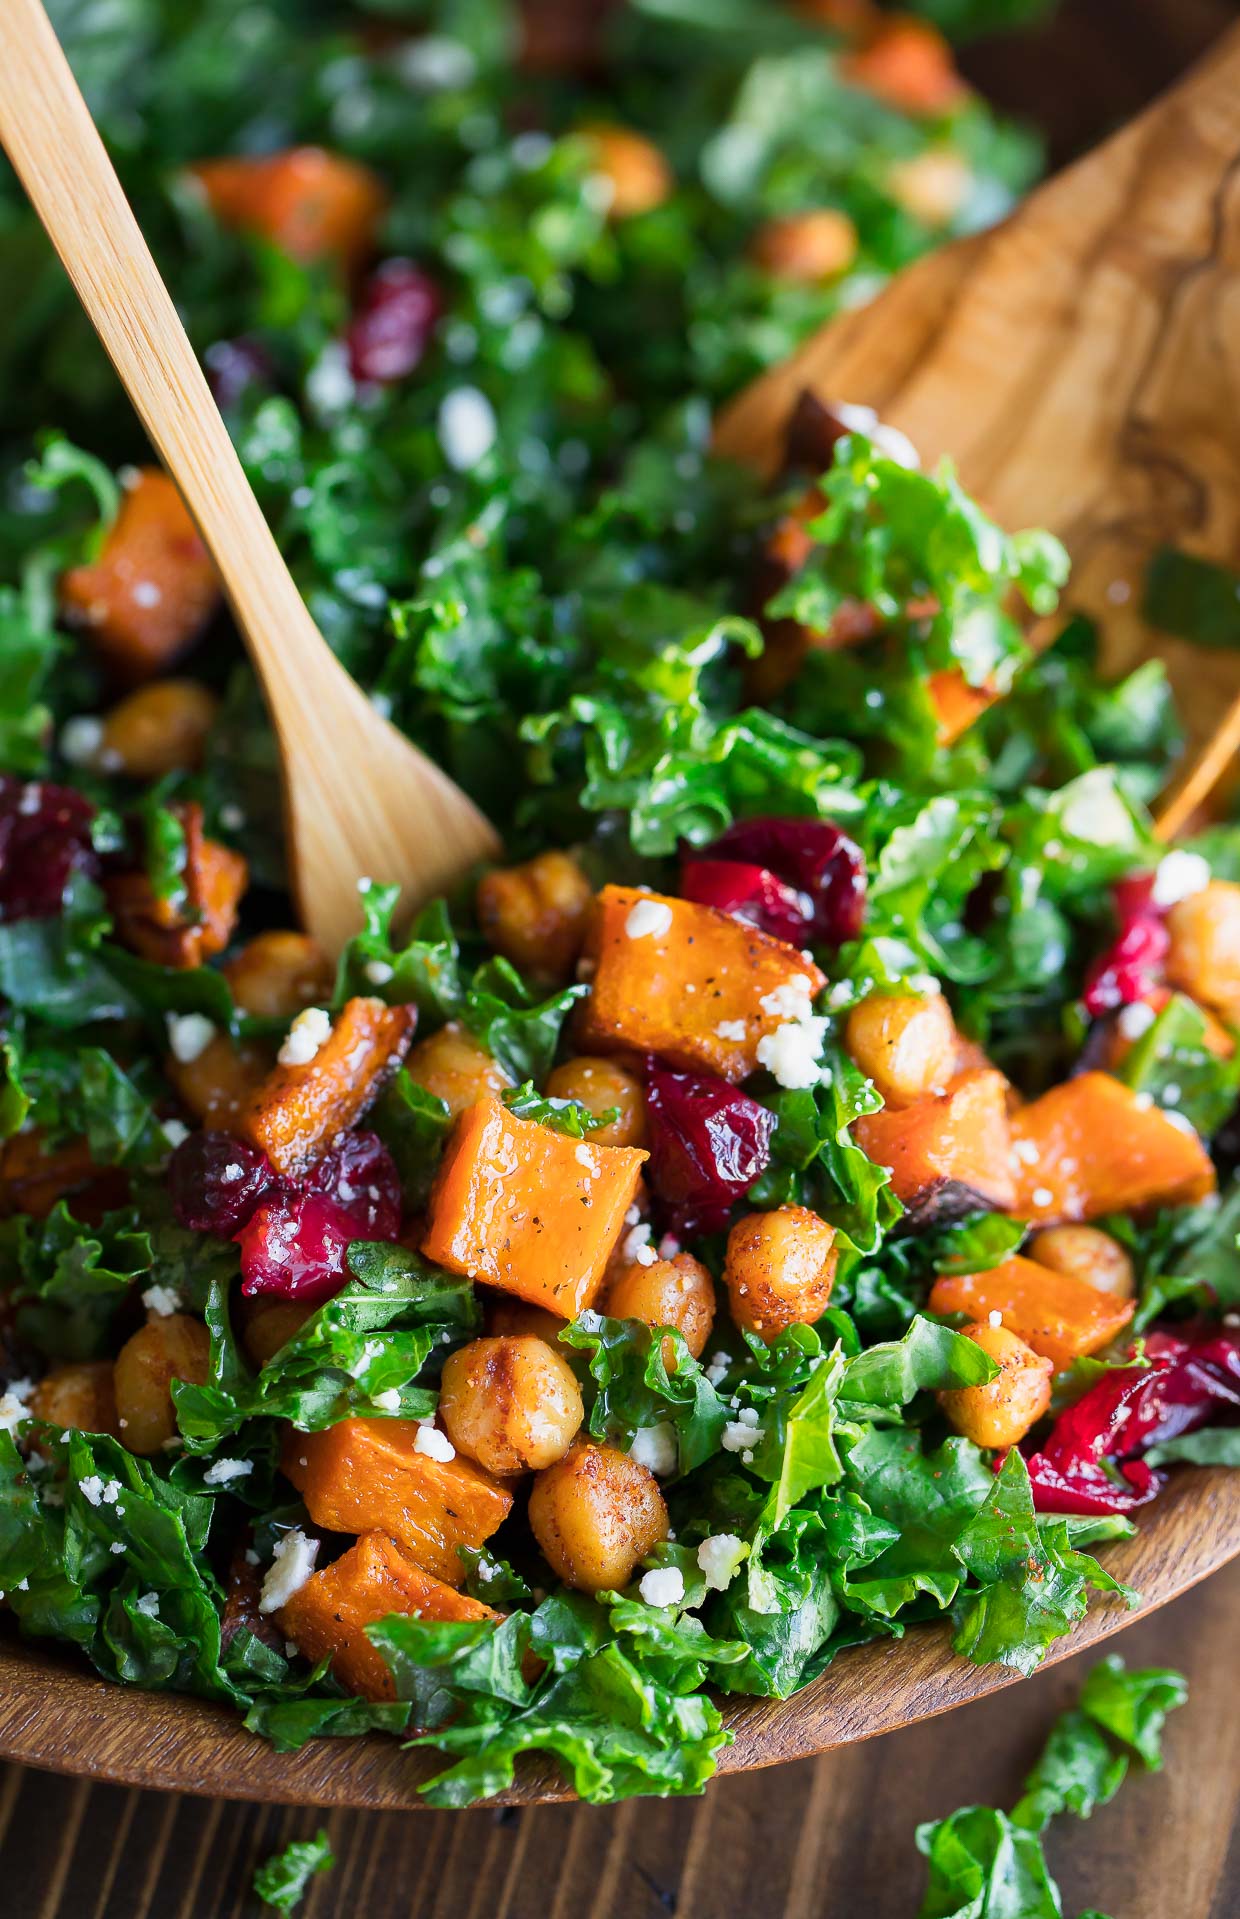 Roasted Butternut Squash Kale Salad with Chickpeas and Cranberries Recipe